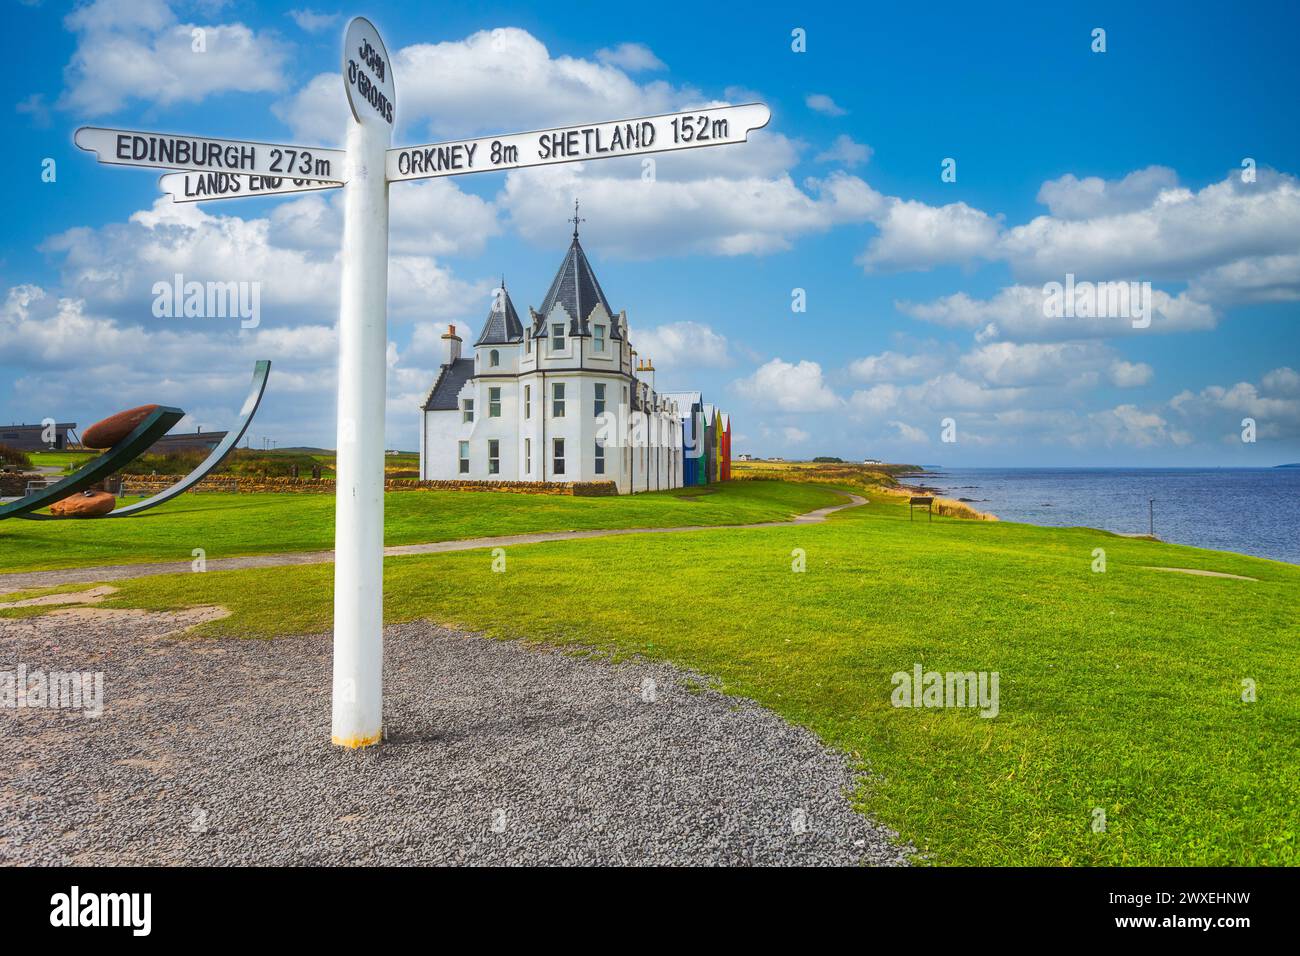 The John O'groats sign during summer sunny day with scattered clouds, Scotland, UK Stock Photo